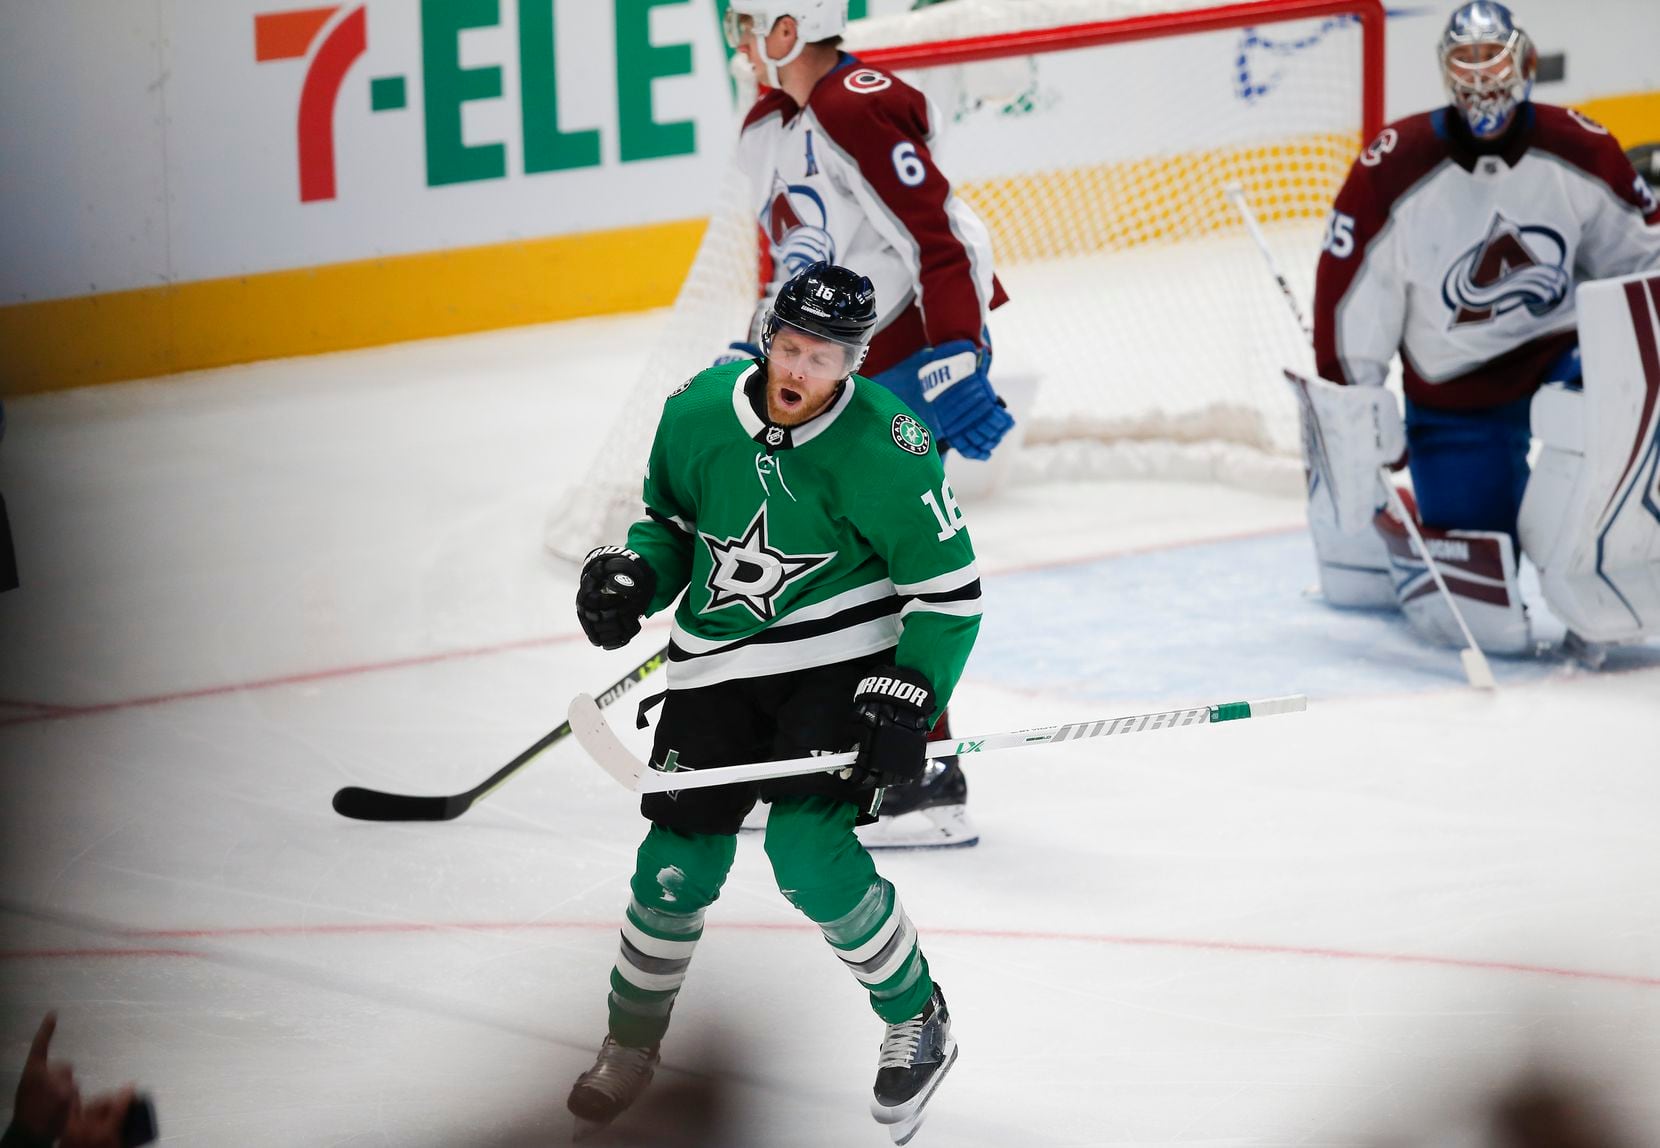 Dallas Stars forward Joe Pavelski (16) celebrates scoring his second goal of the game during the first period of an NHL hockey game against the Colorado Avalanche in Dallas, Friday, November 26, 2021. (Brandon Wade/Special Contributor)